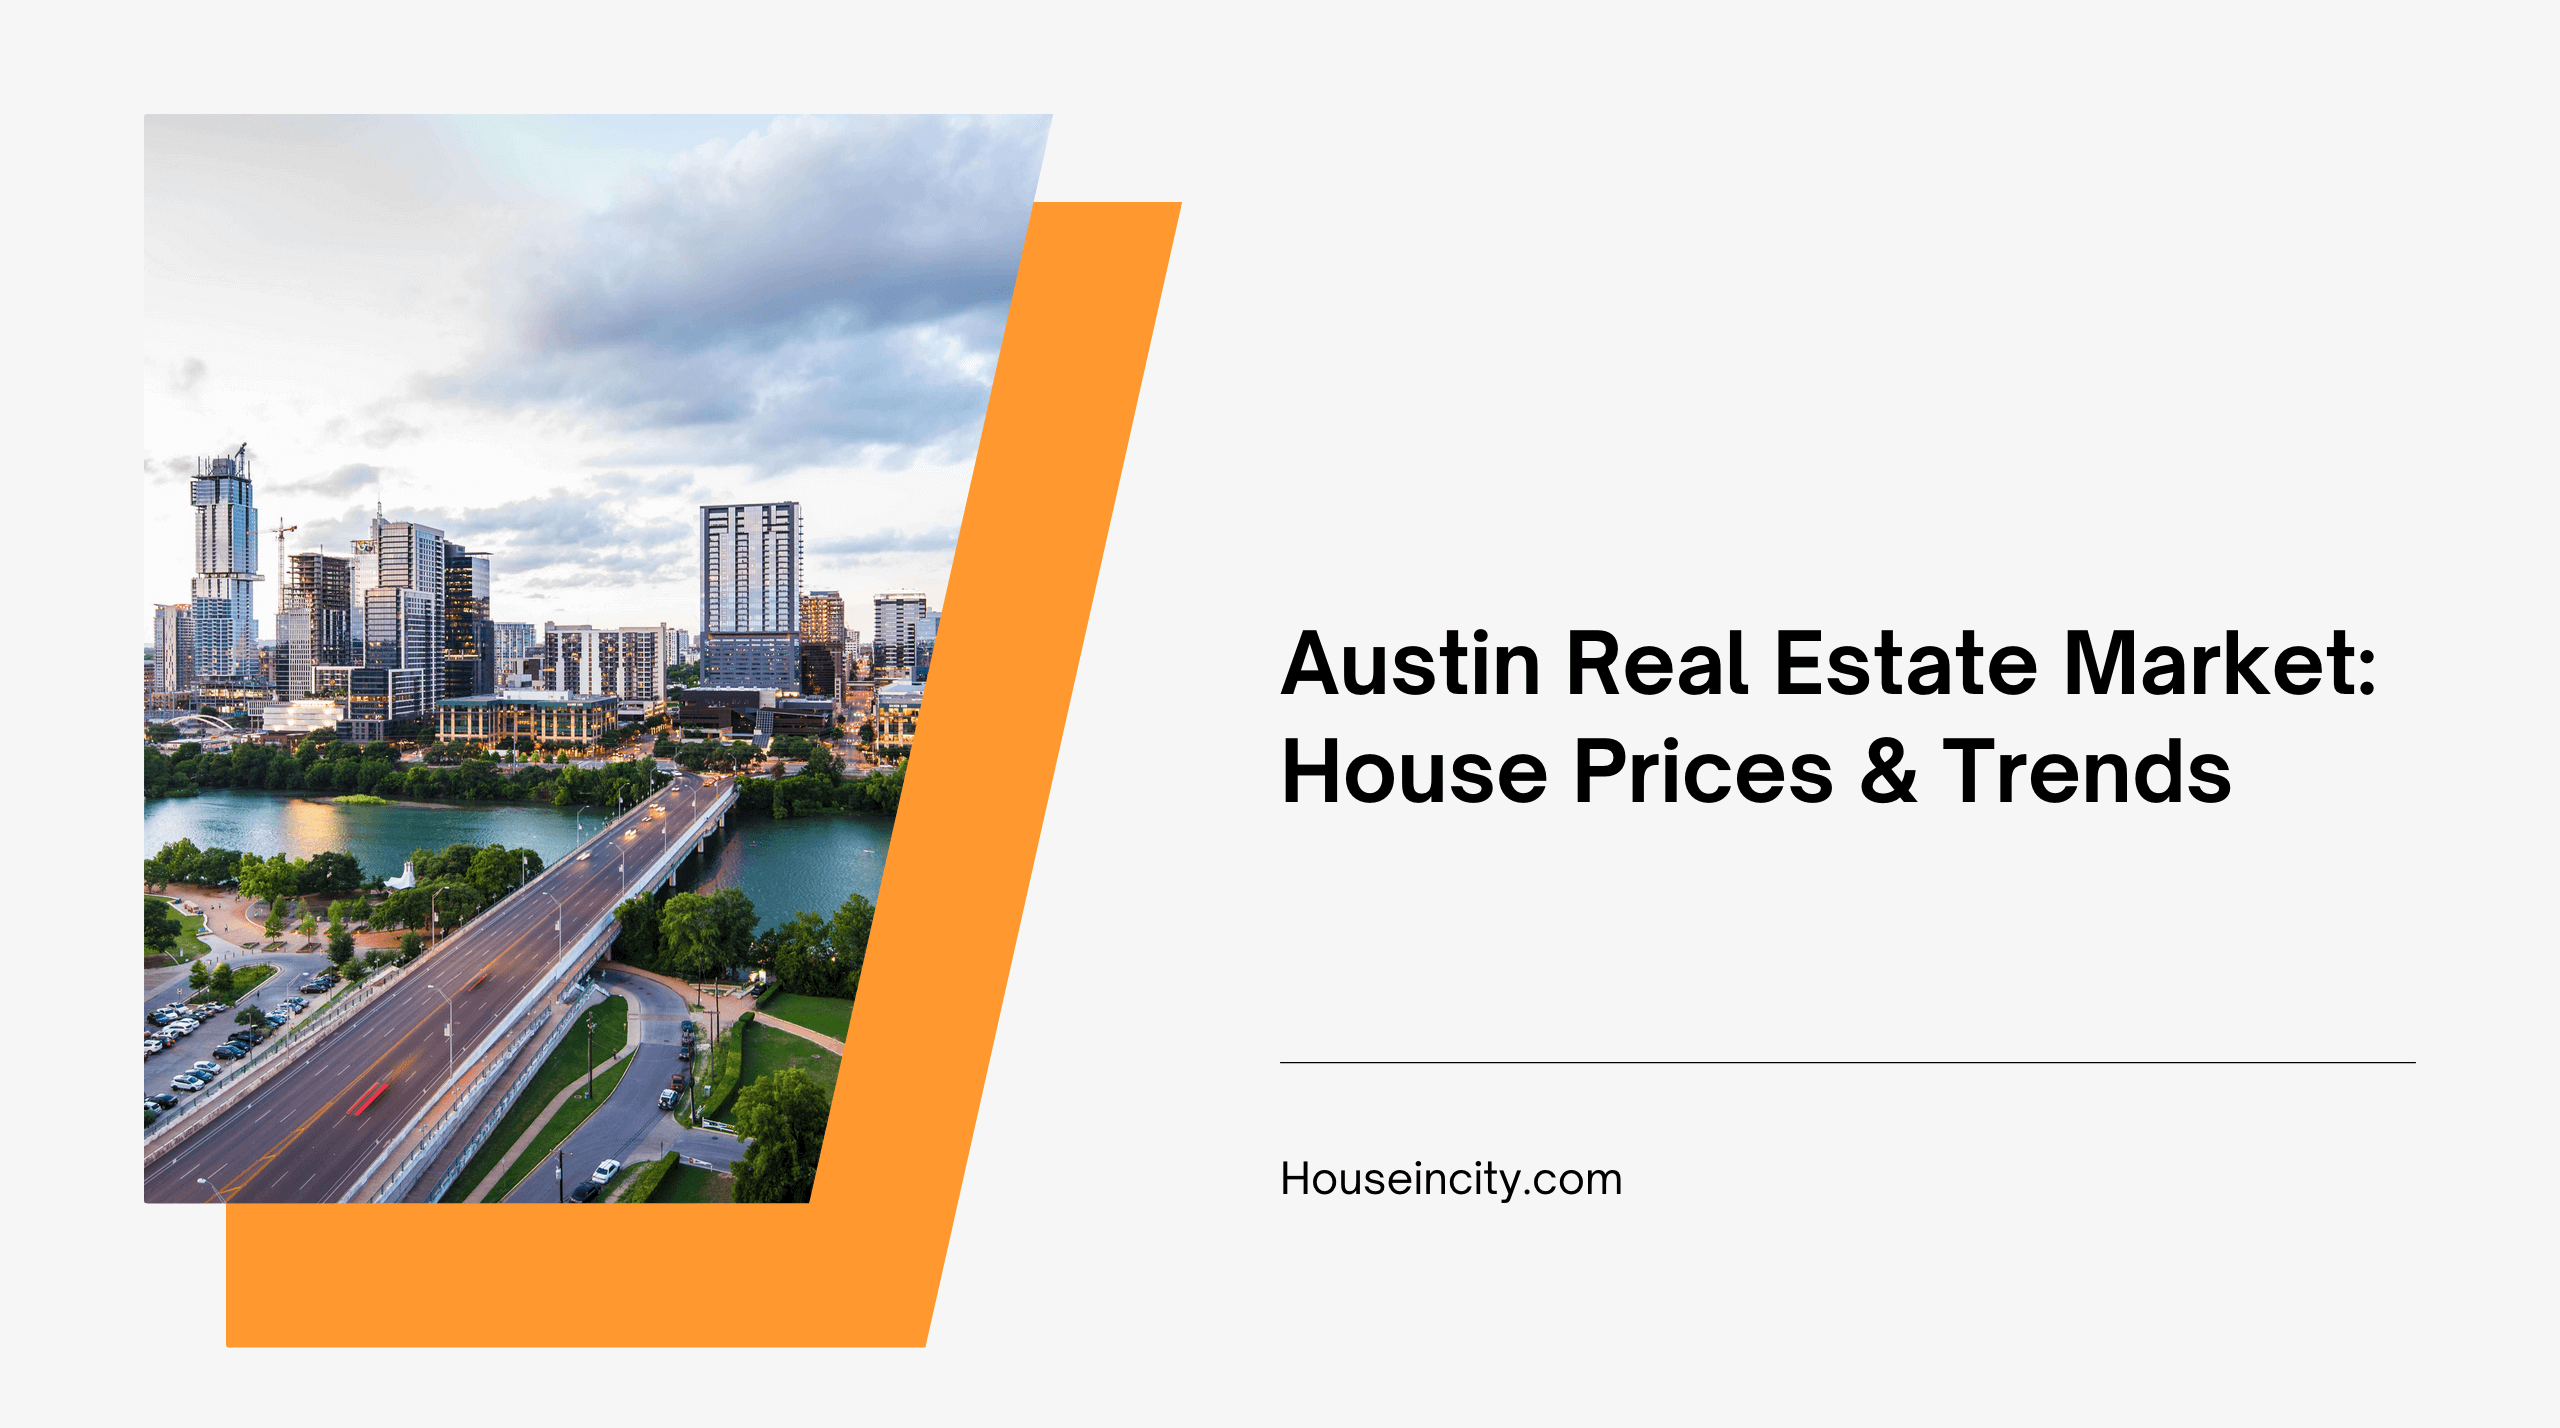 Austin Real Estate Market: House Prices & Trends